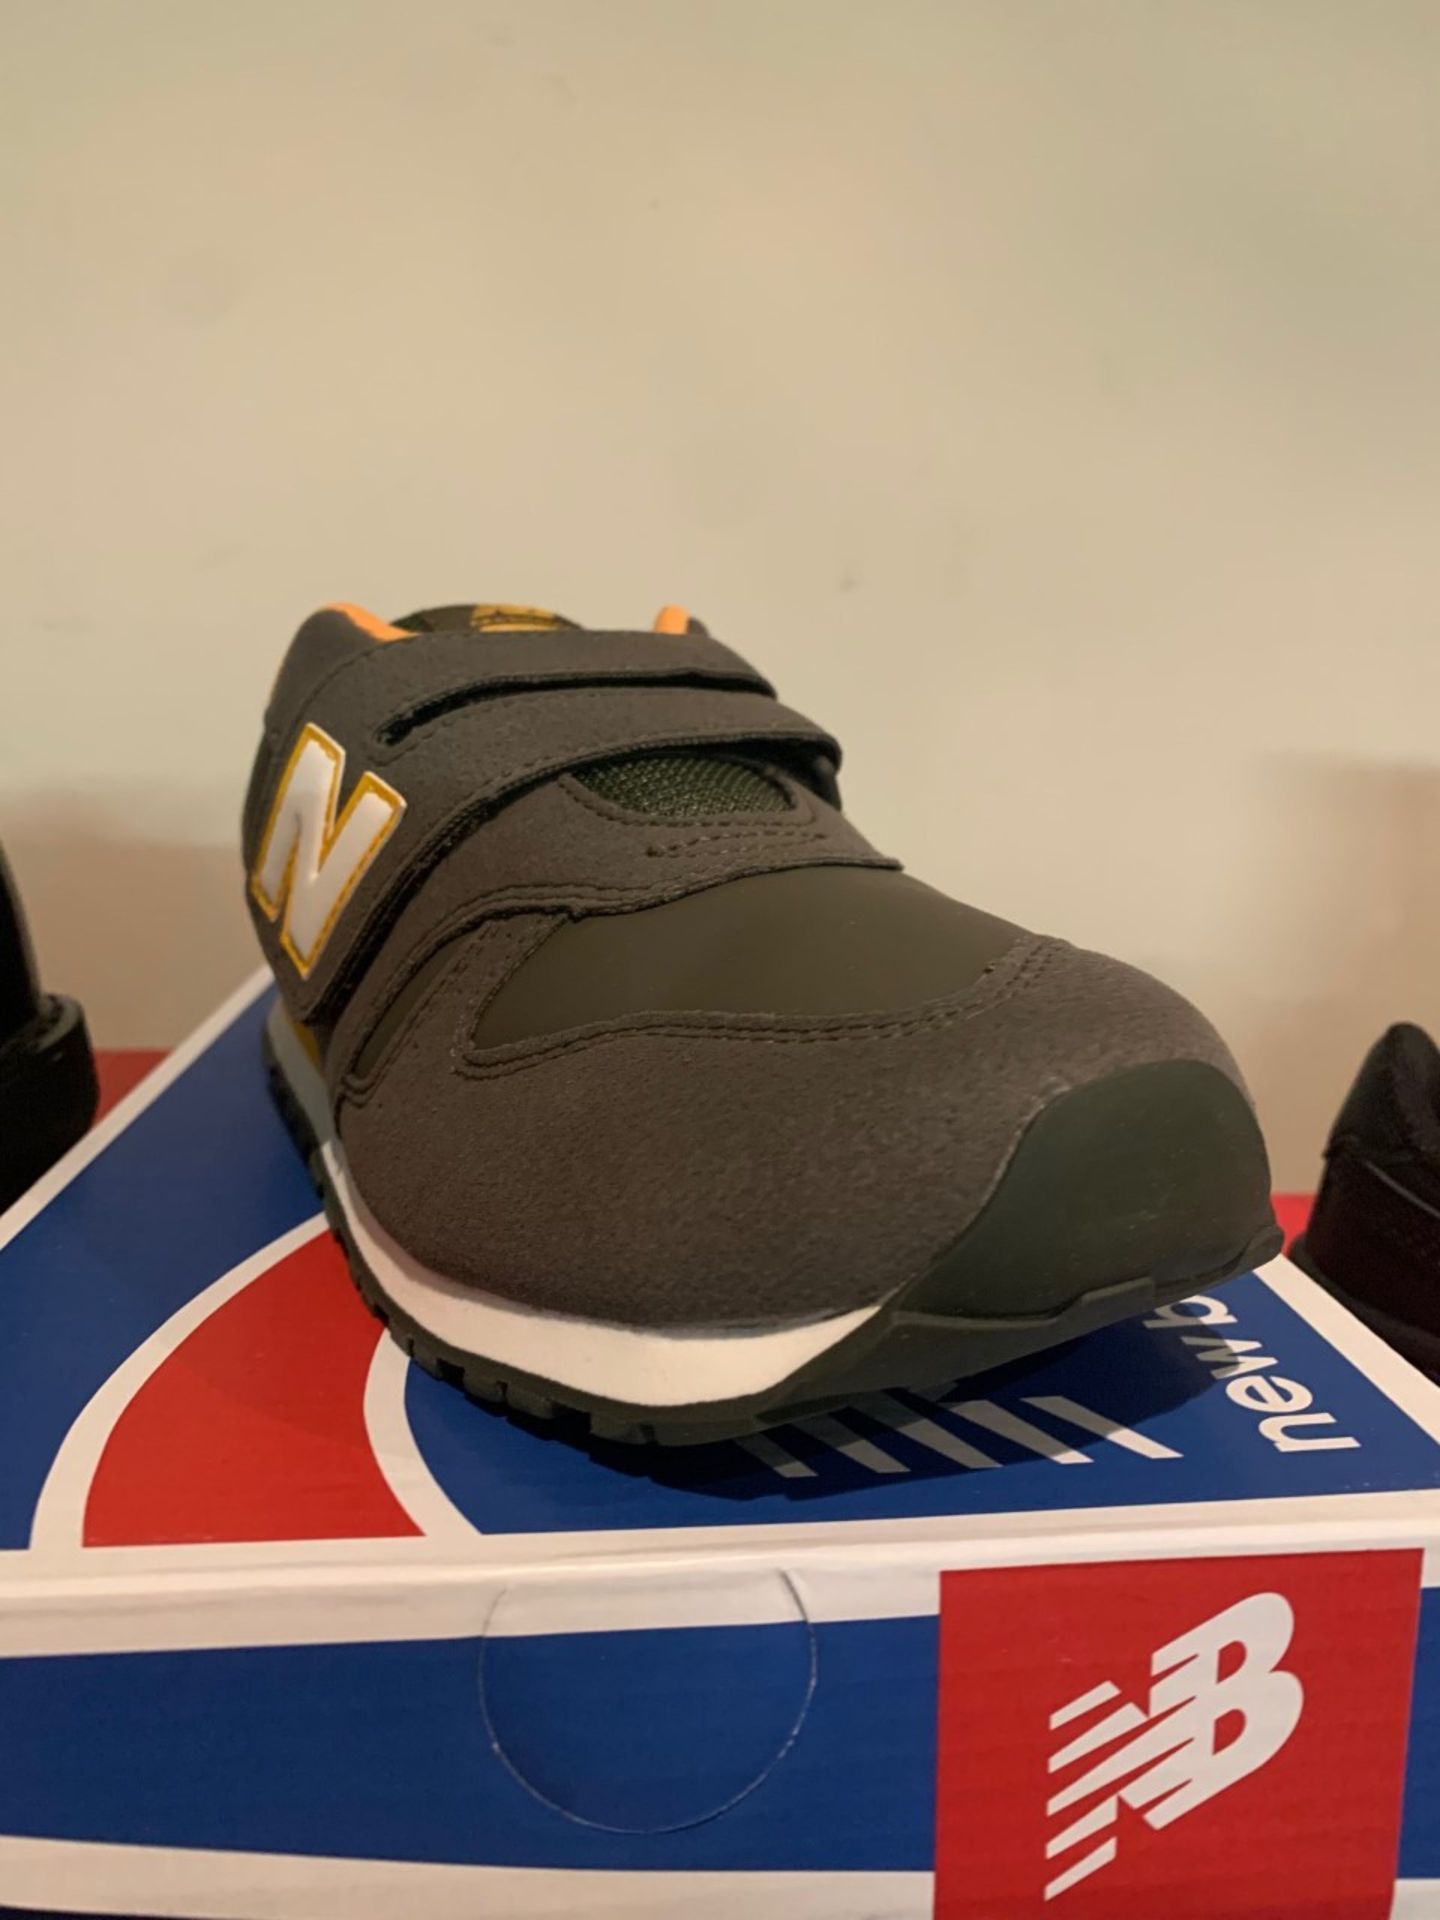 NEW & BOXED NEW BALANCE OLIVE TRAINER SIZE JUNIOR 5 (151/21) - Image 2 of 2